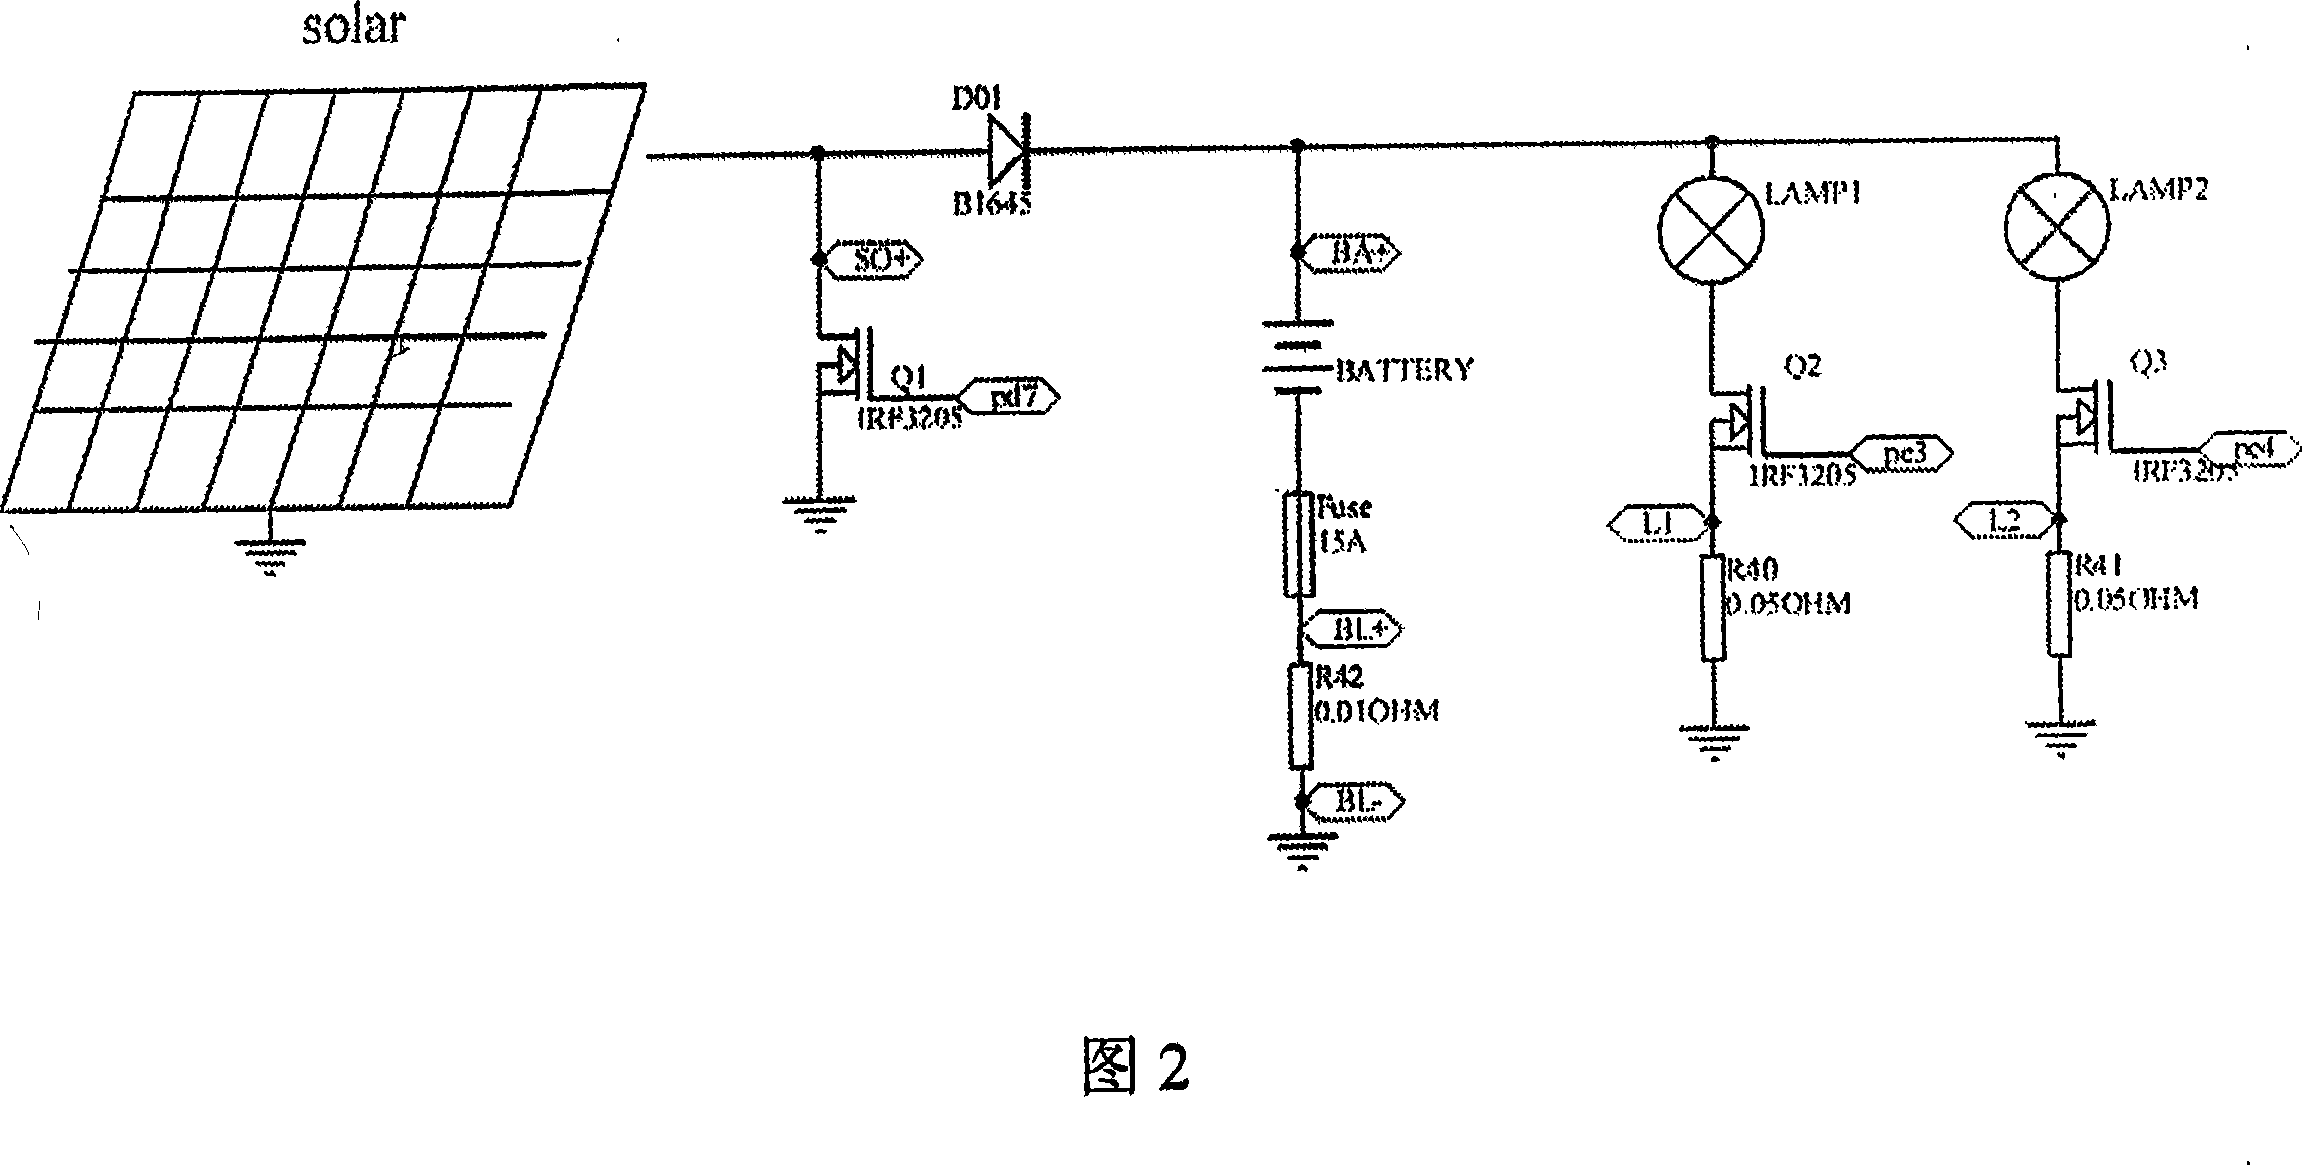 Control system of solar energy street lamp with display of self checked fault